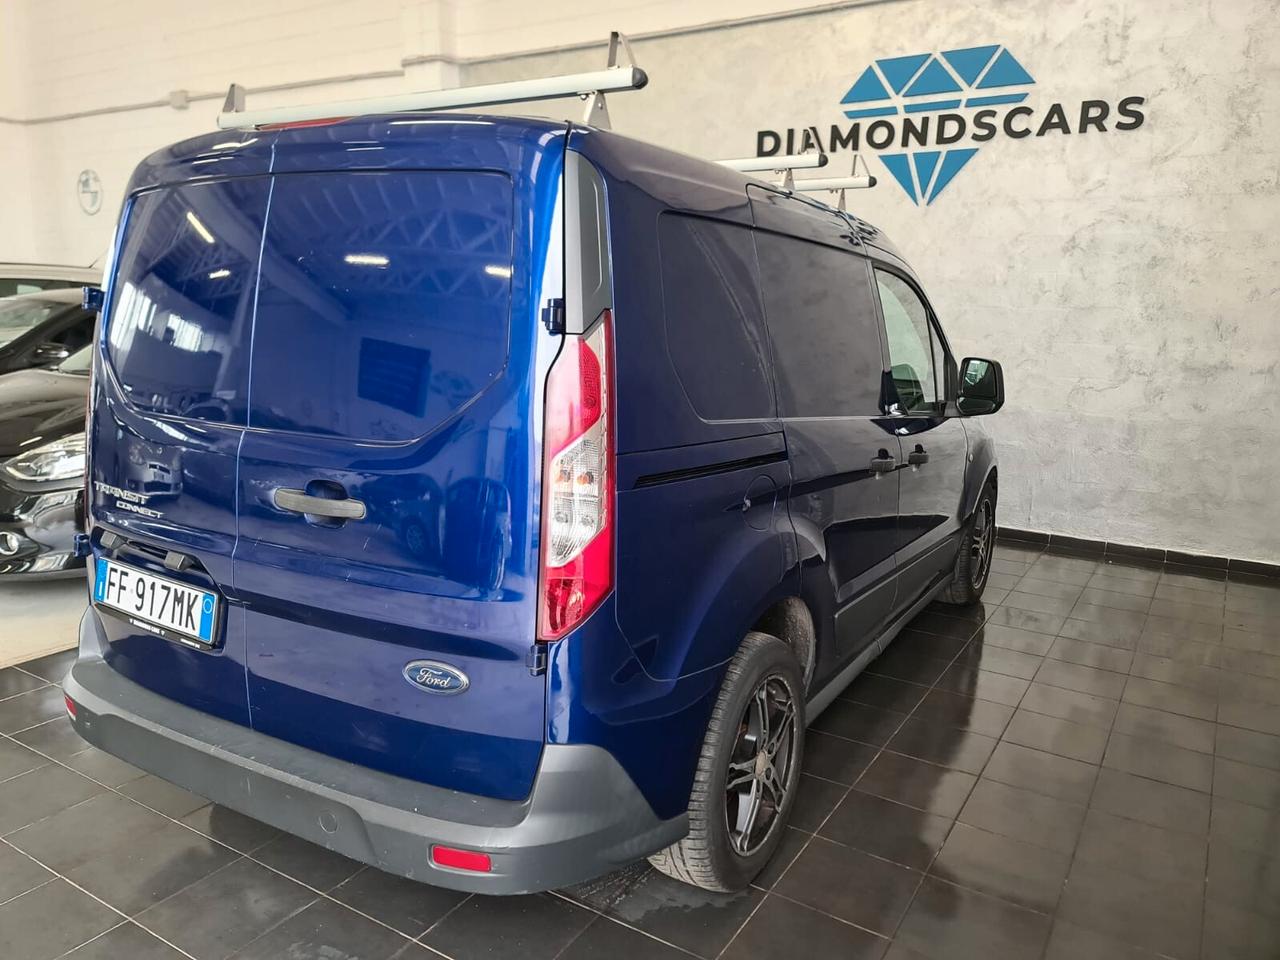 FORD TRANSIT CONNECT 1.5 TDCI